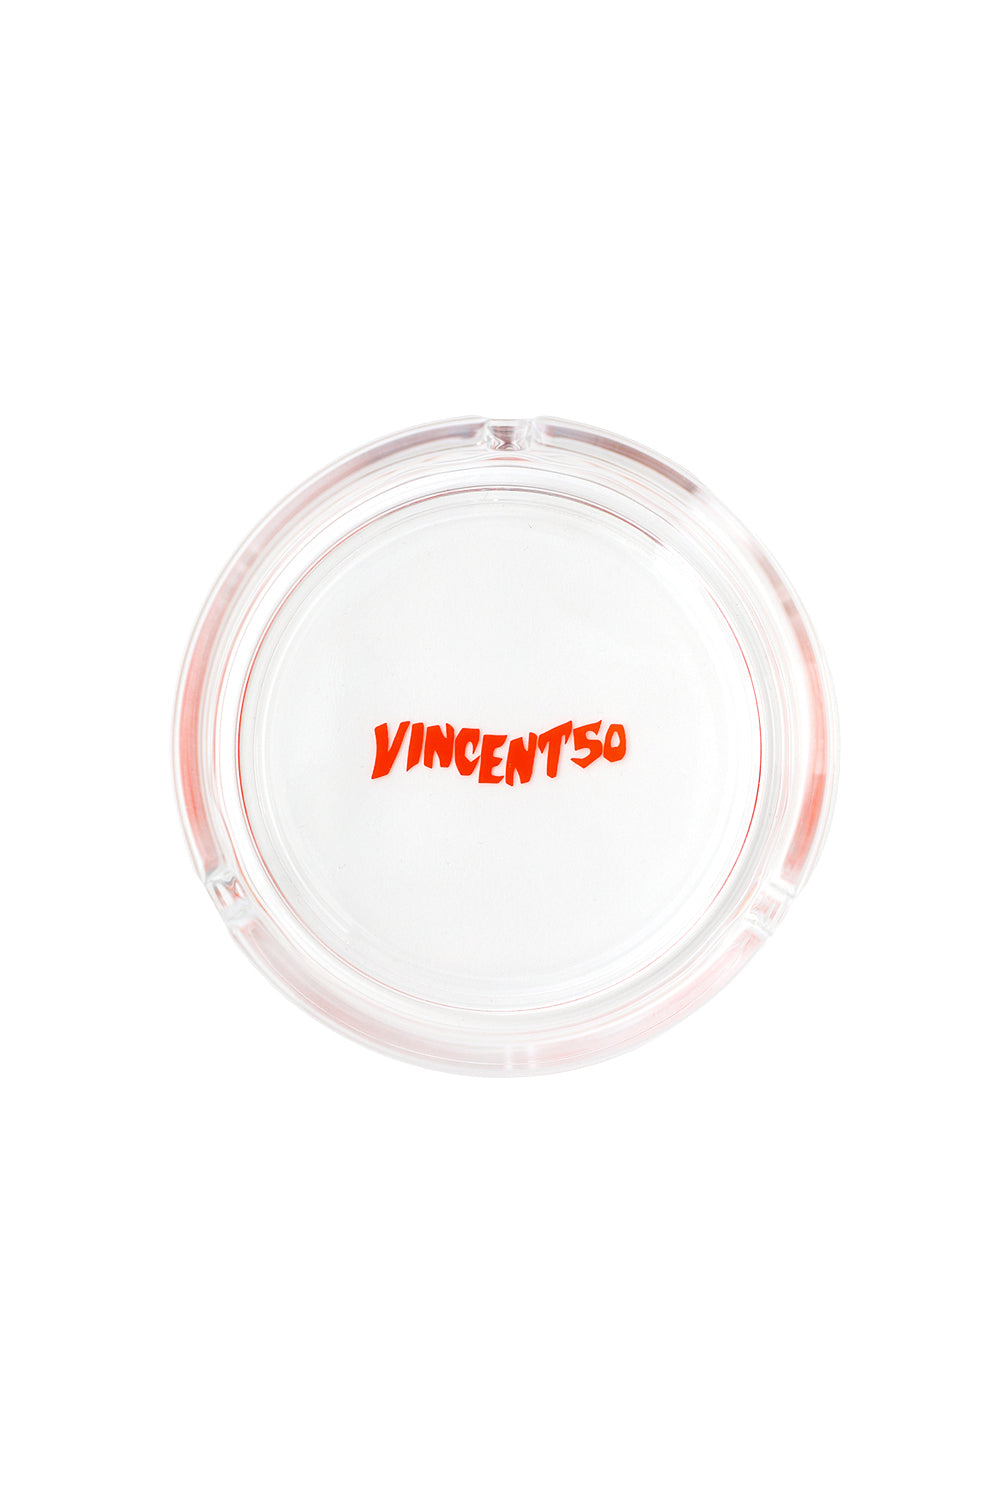 VINCENT50 Ashtray Red